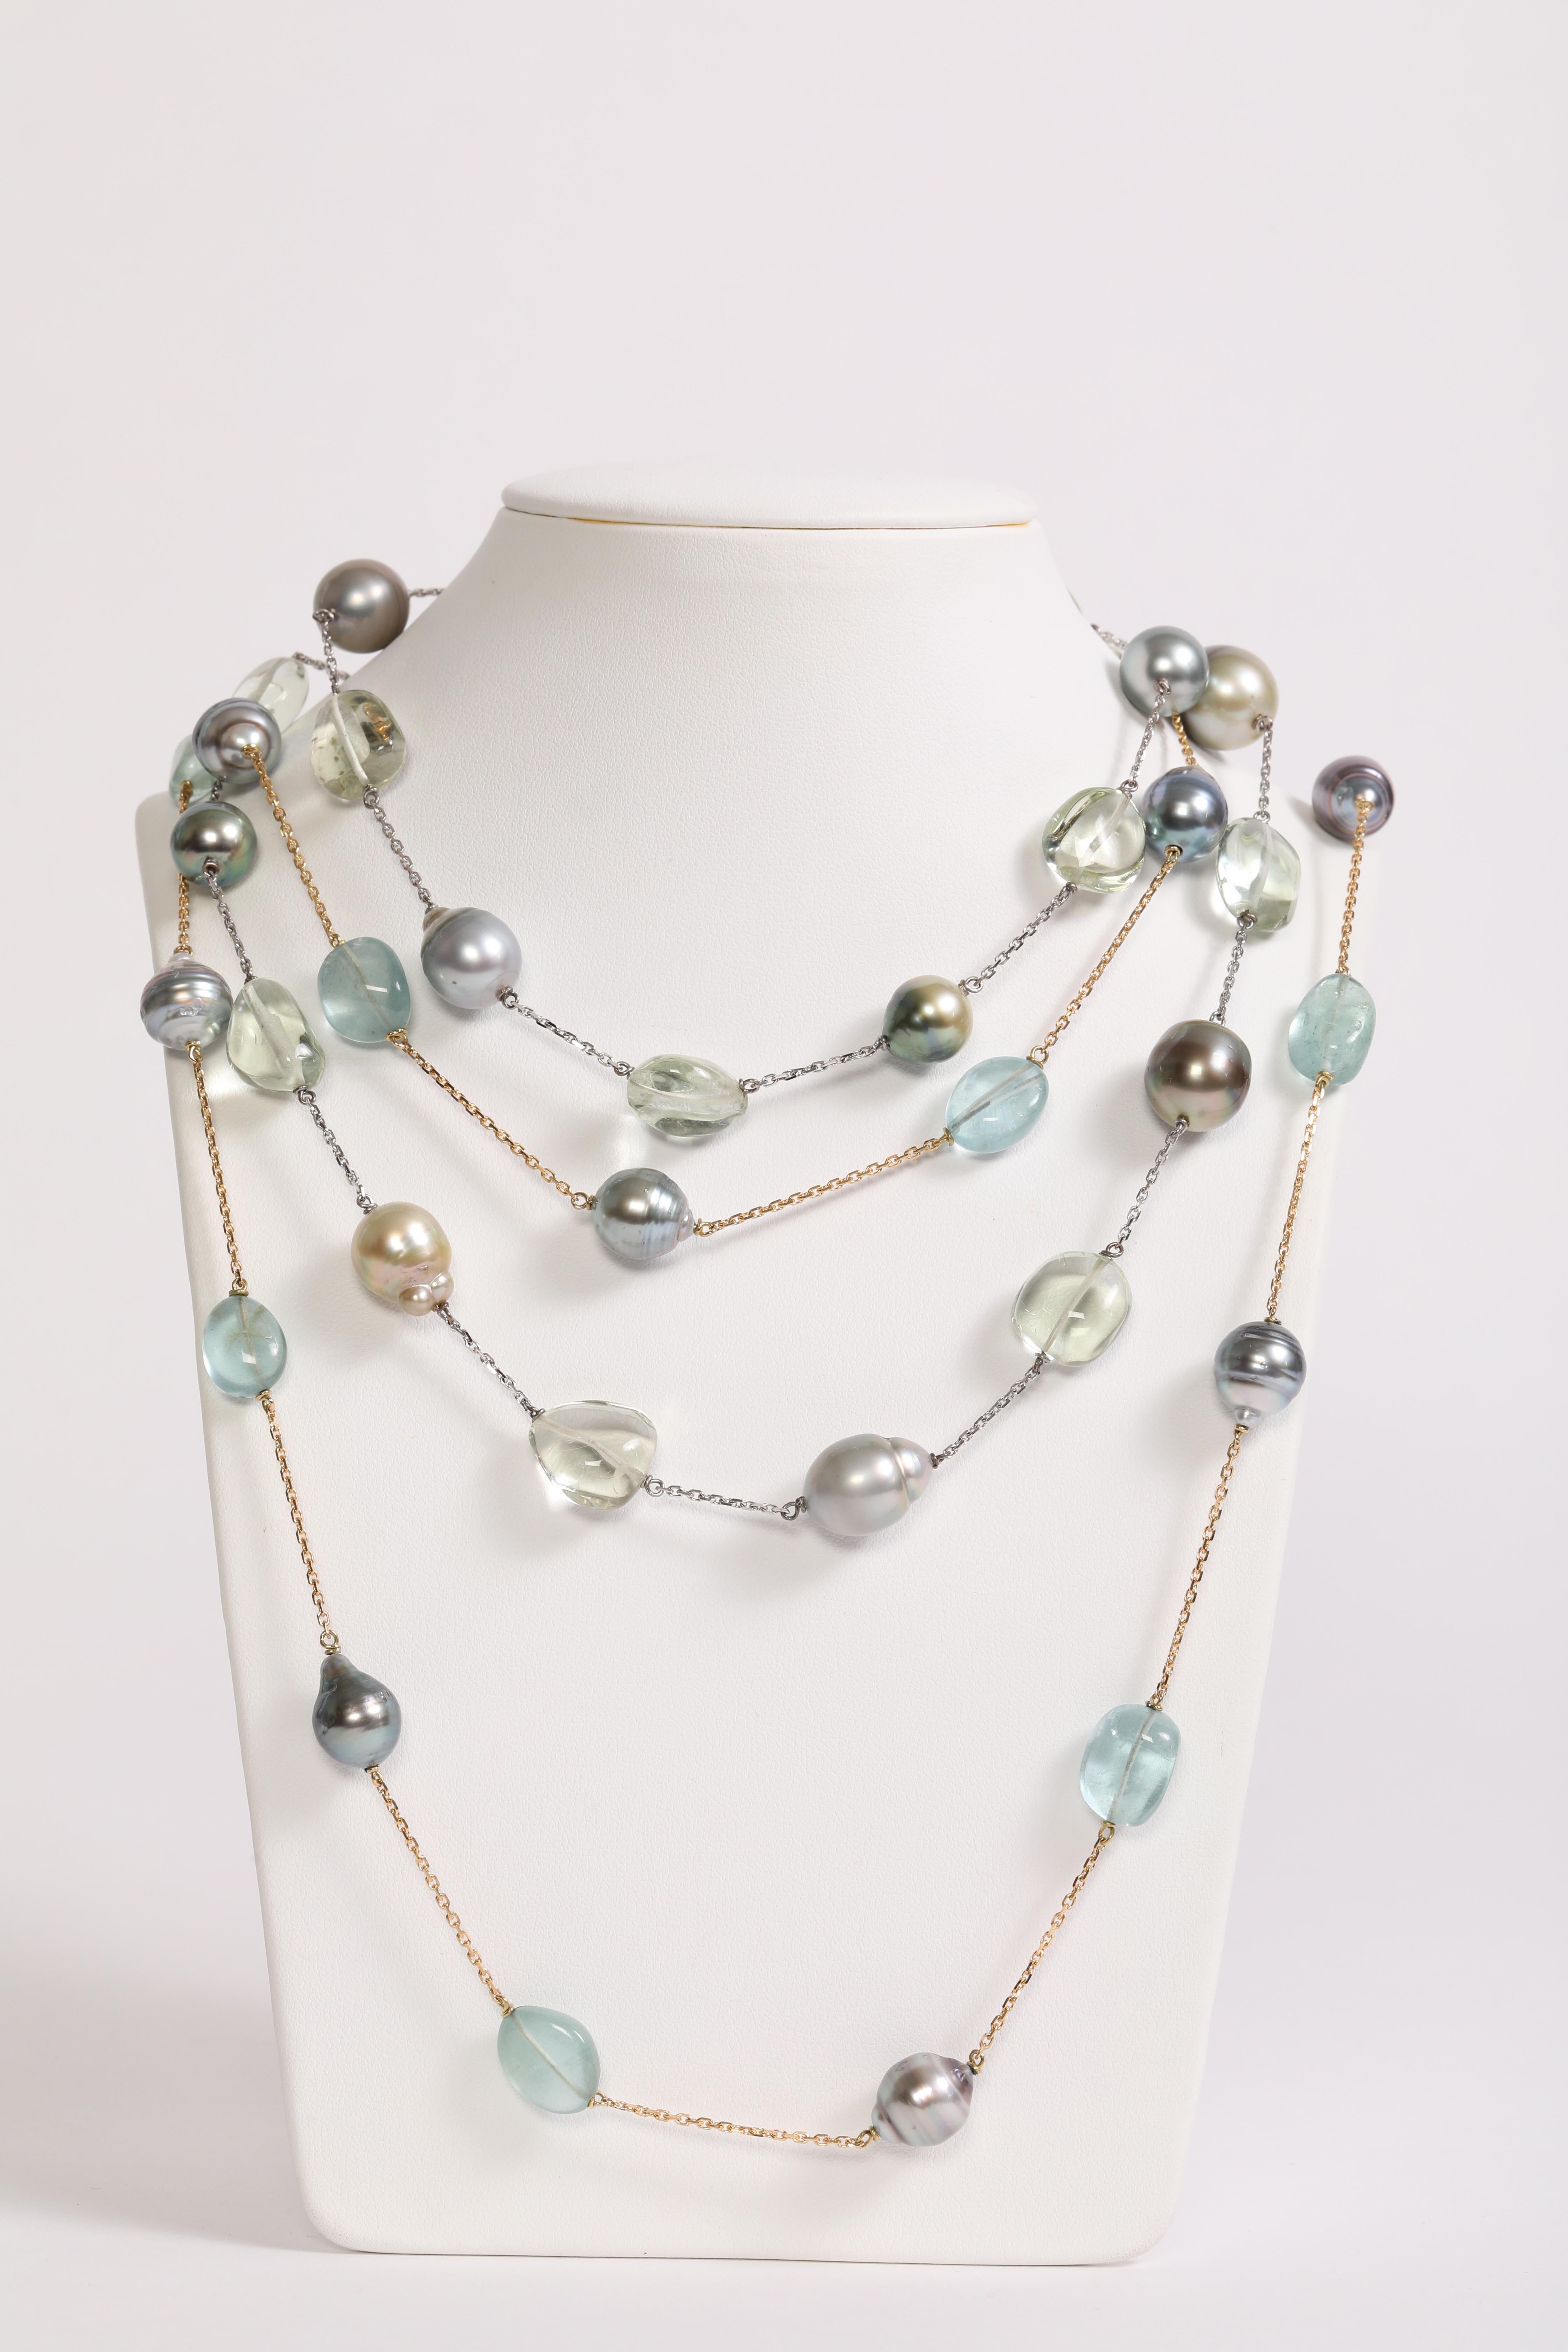 Baroque Tahiti Pearls and Aquamarine Long Necklace Created by Marion Jeantet For Sale 1